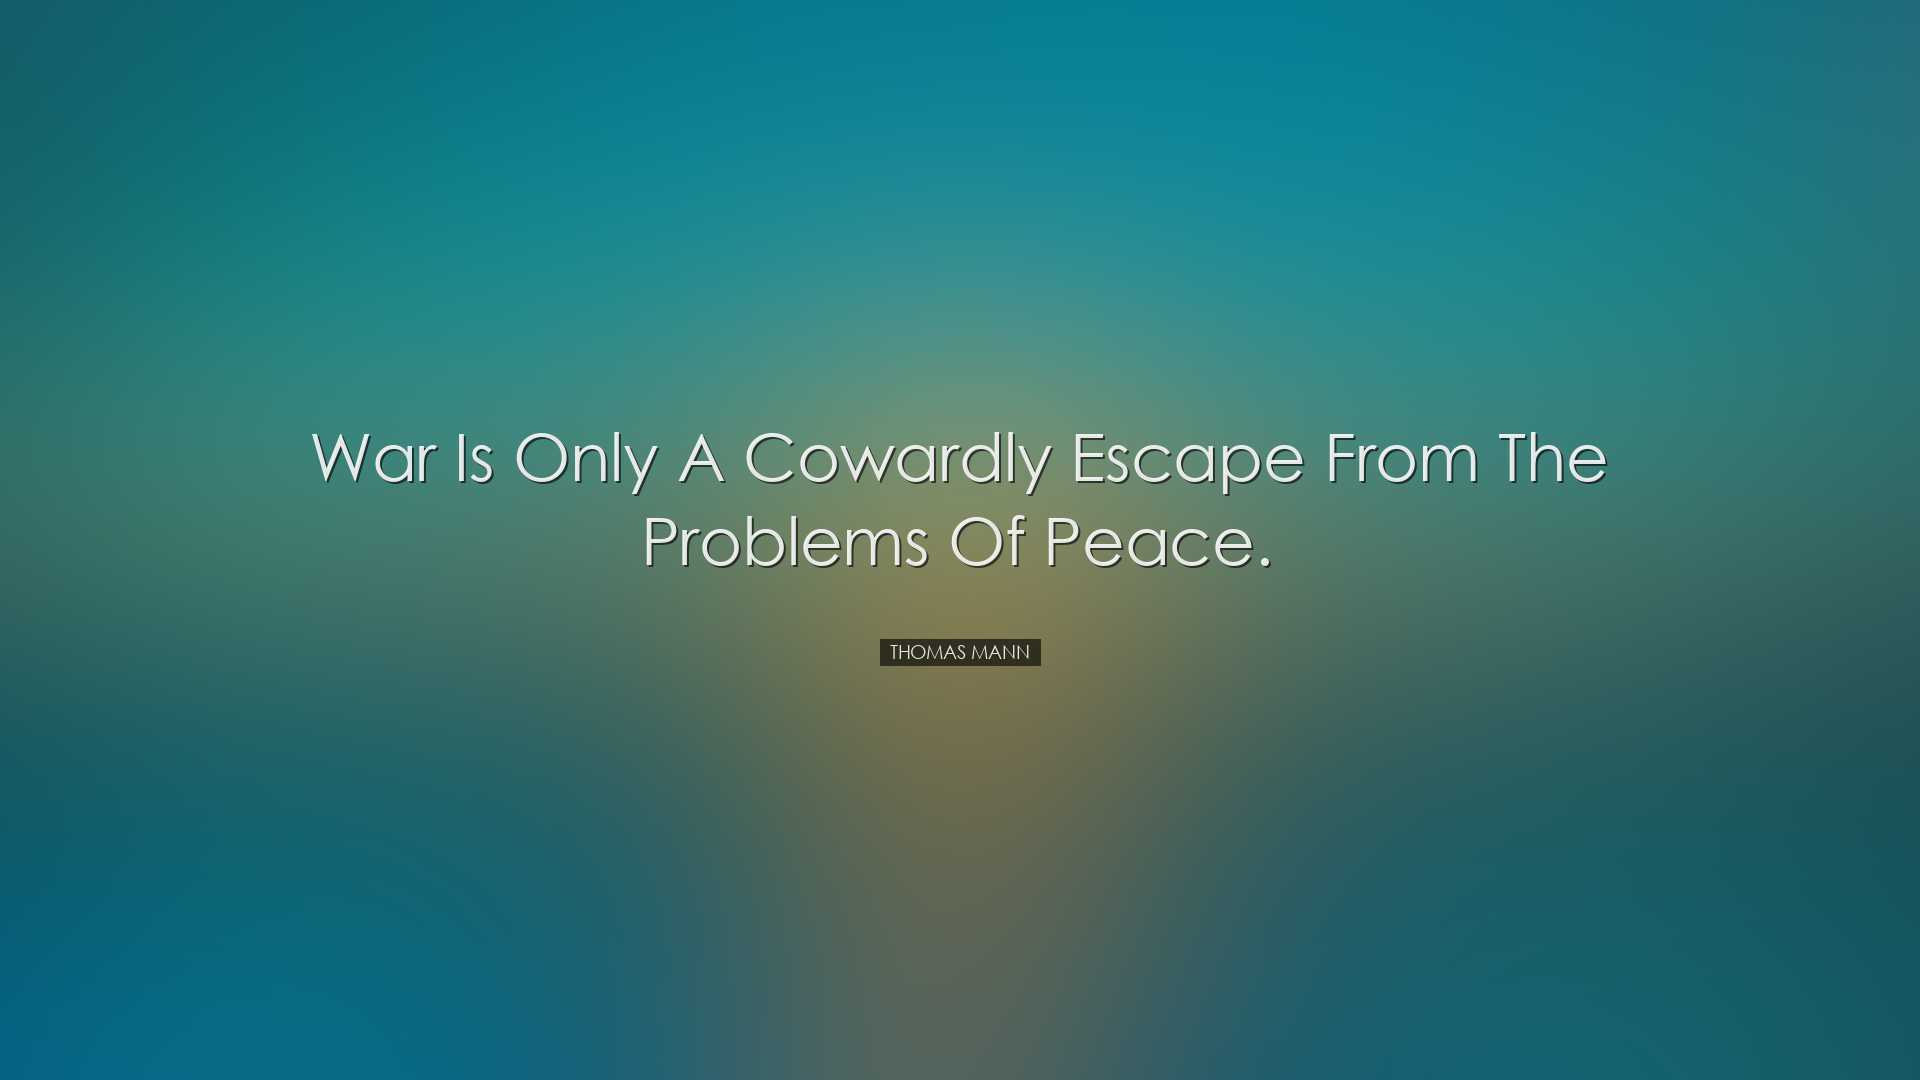 War is only a cowardly escape from the problems of peace. - Thomas